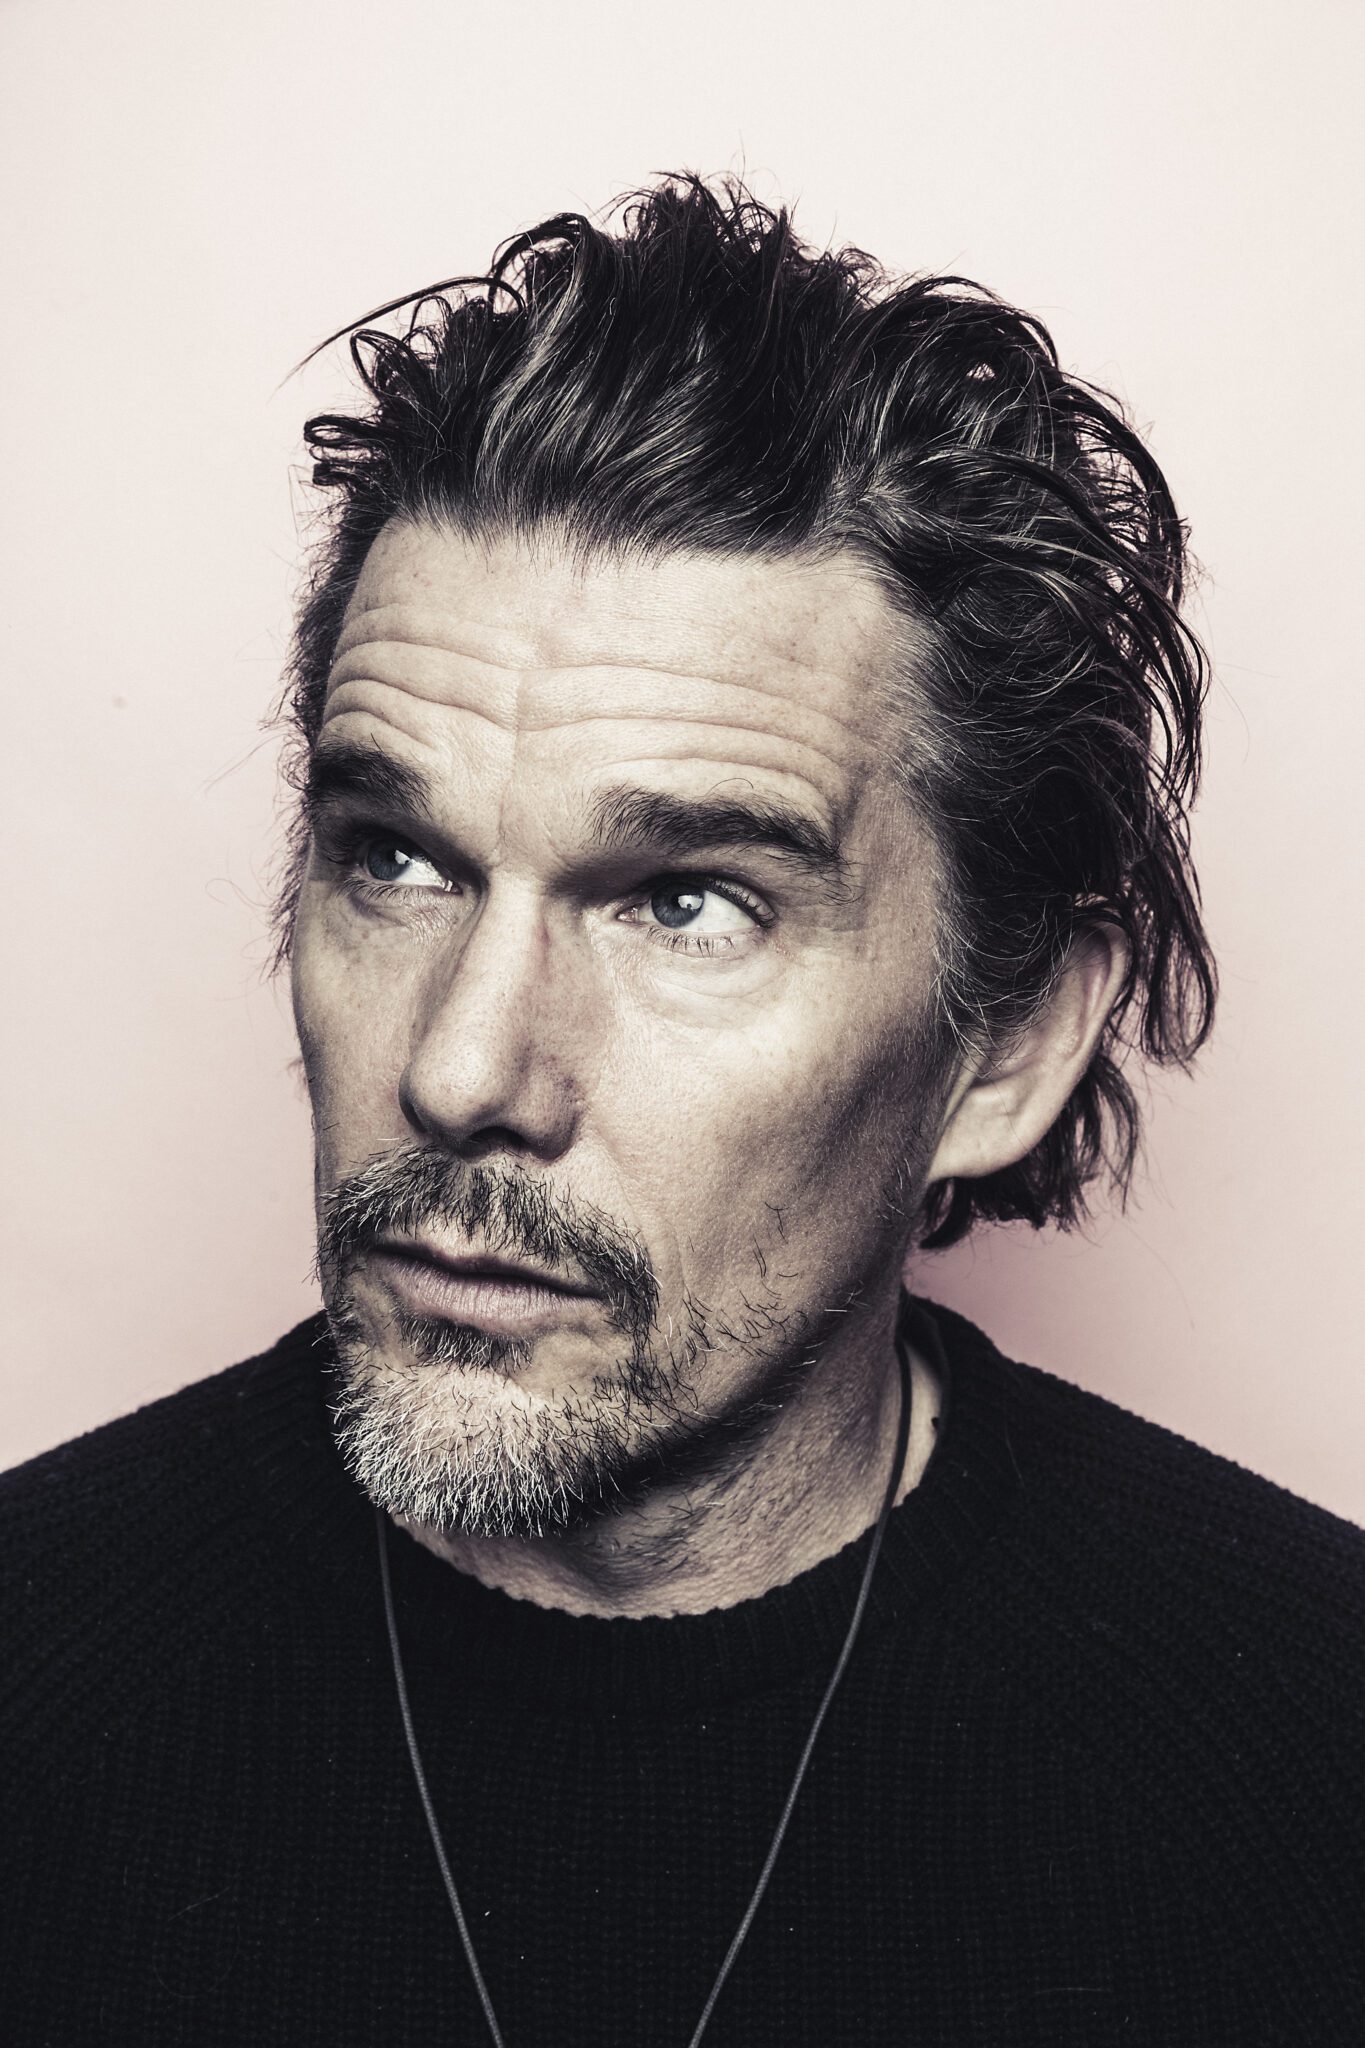 Ethan Hawke on the 'madness' of Flannery O’Connor - Brooklyn Magazine